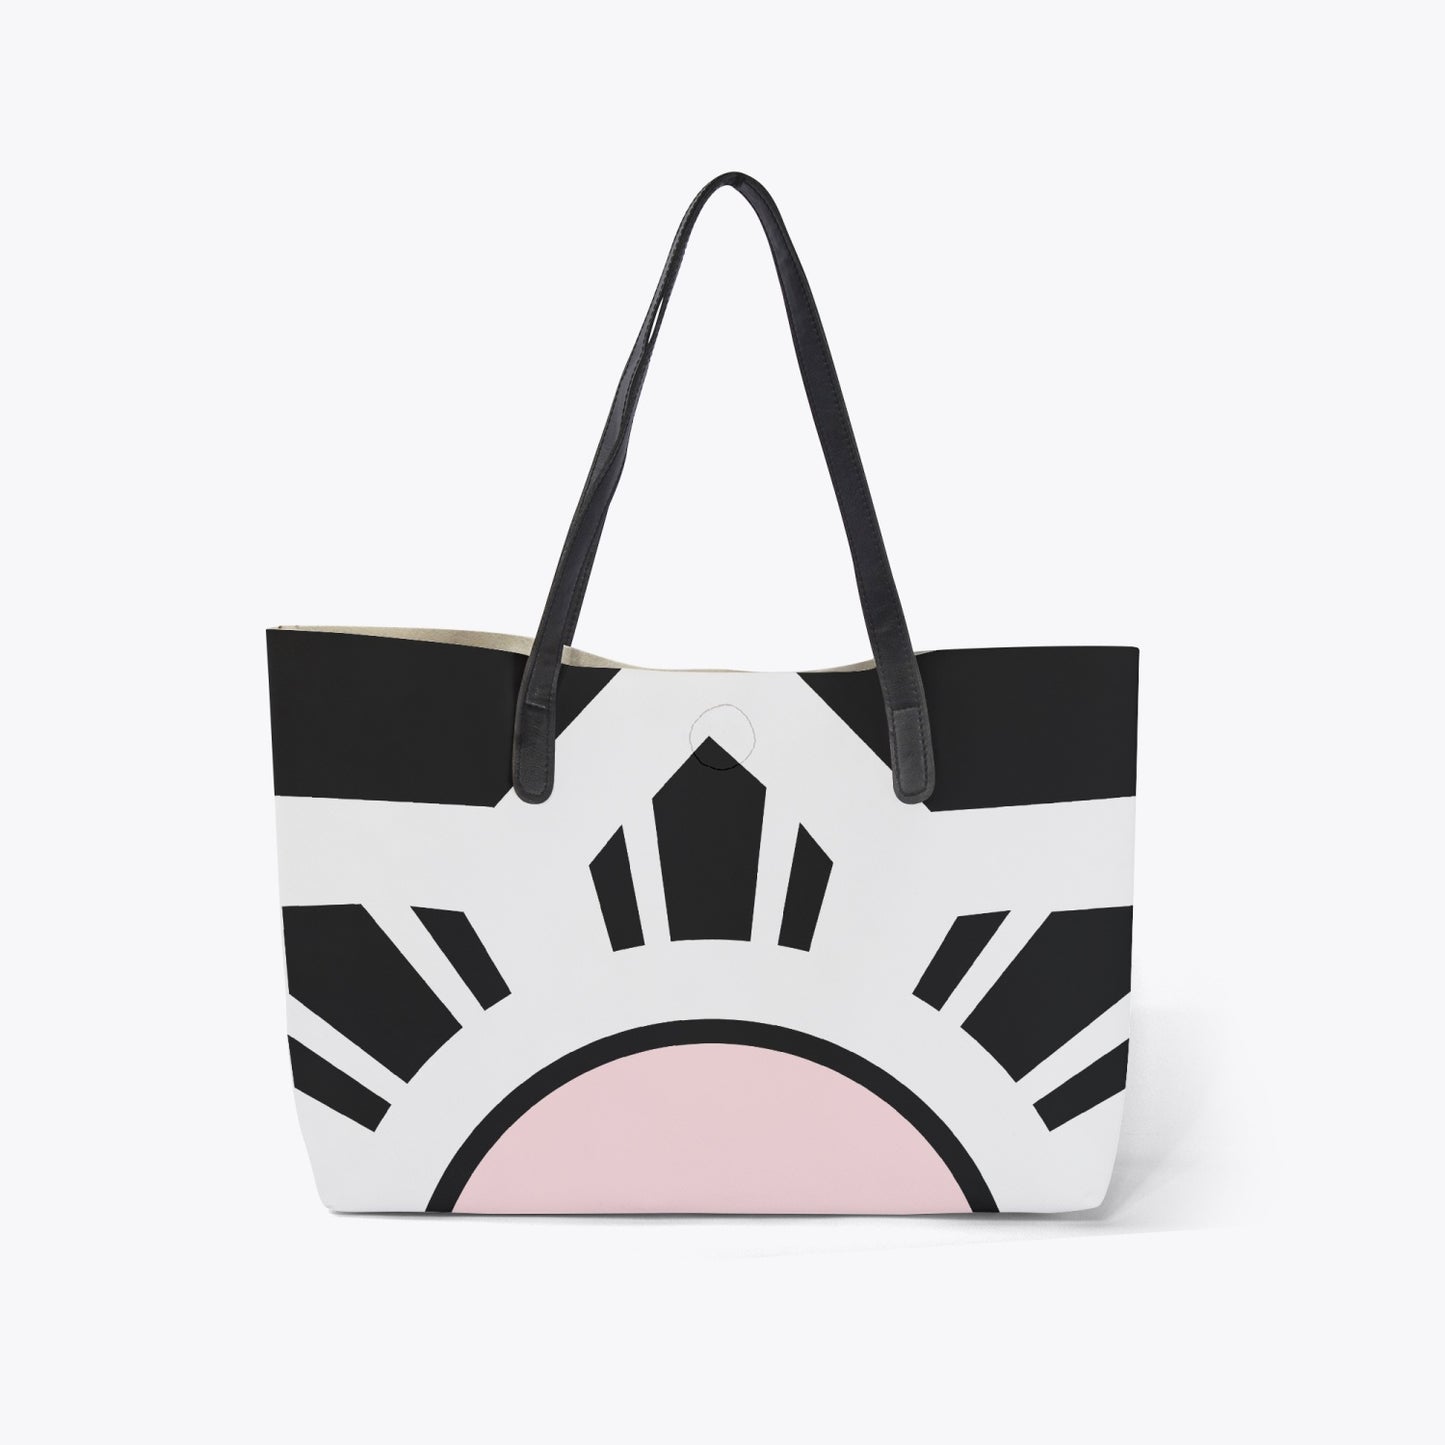 Tote Bag, Black, White, Pink, Gifts for her